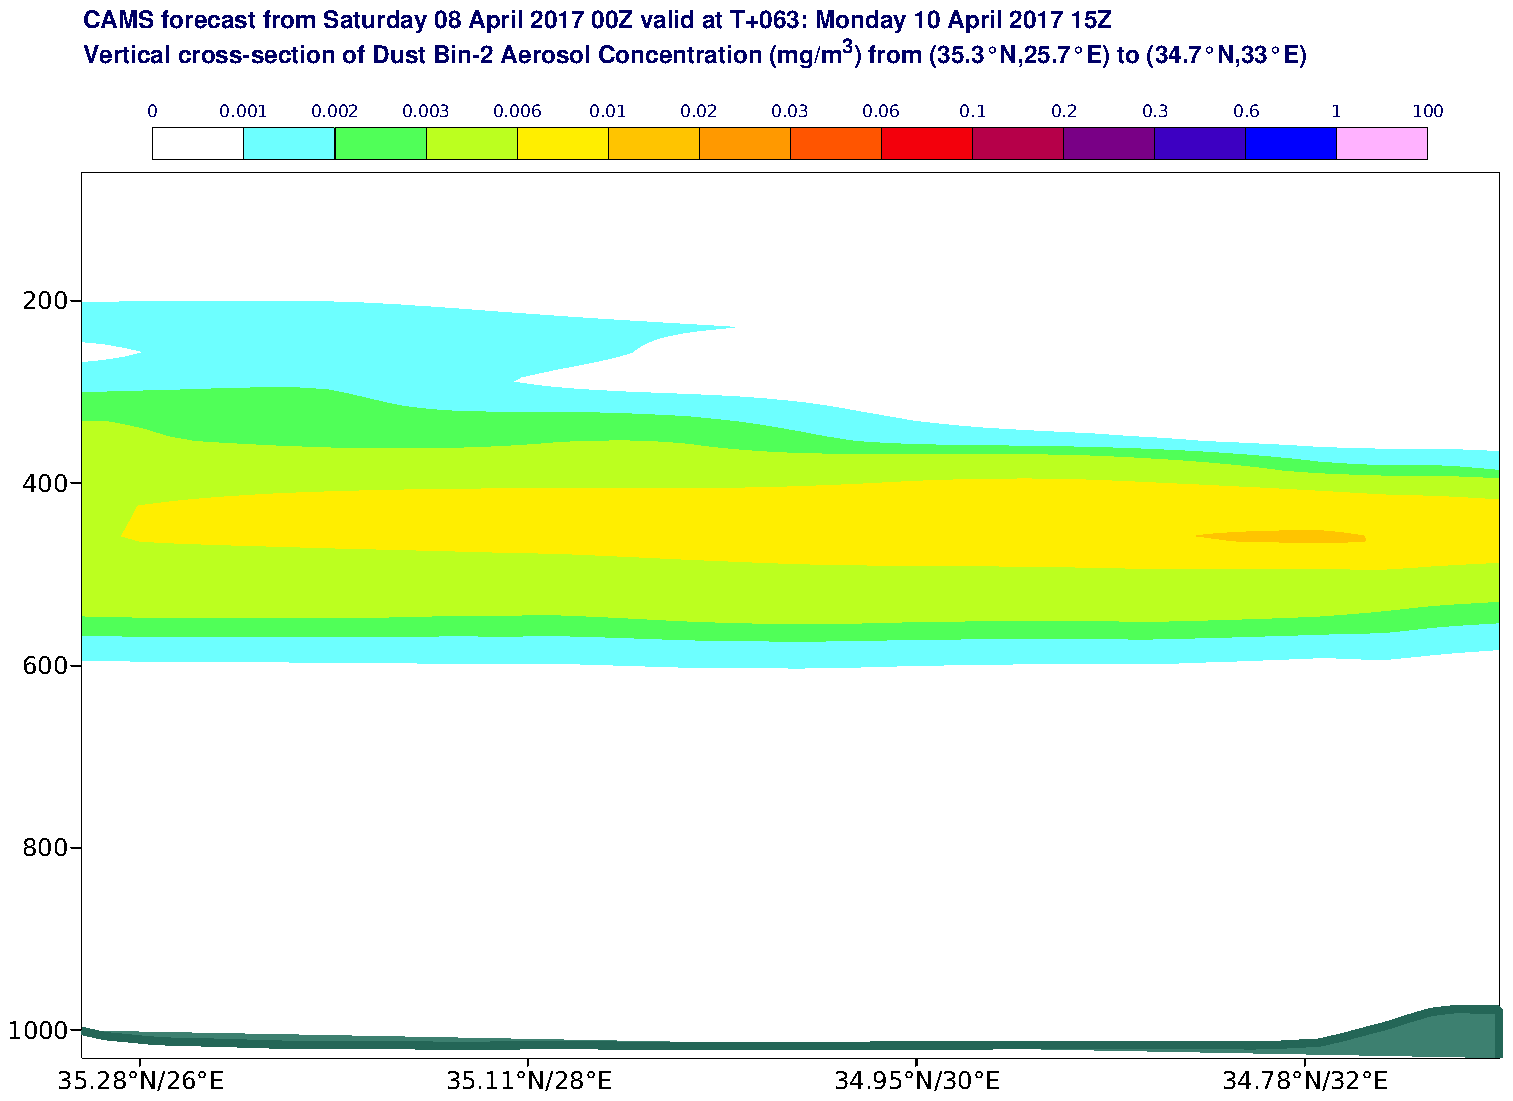 Vertical cross-section of Dust Bin-2 Aerosol Concentration (mg/m3) valid at T63 - 2017-04-10 15:00